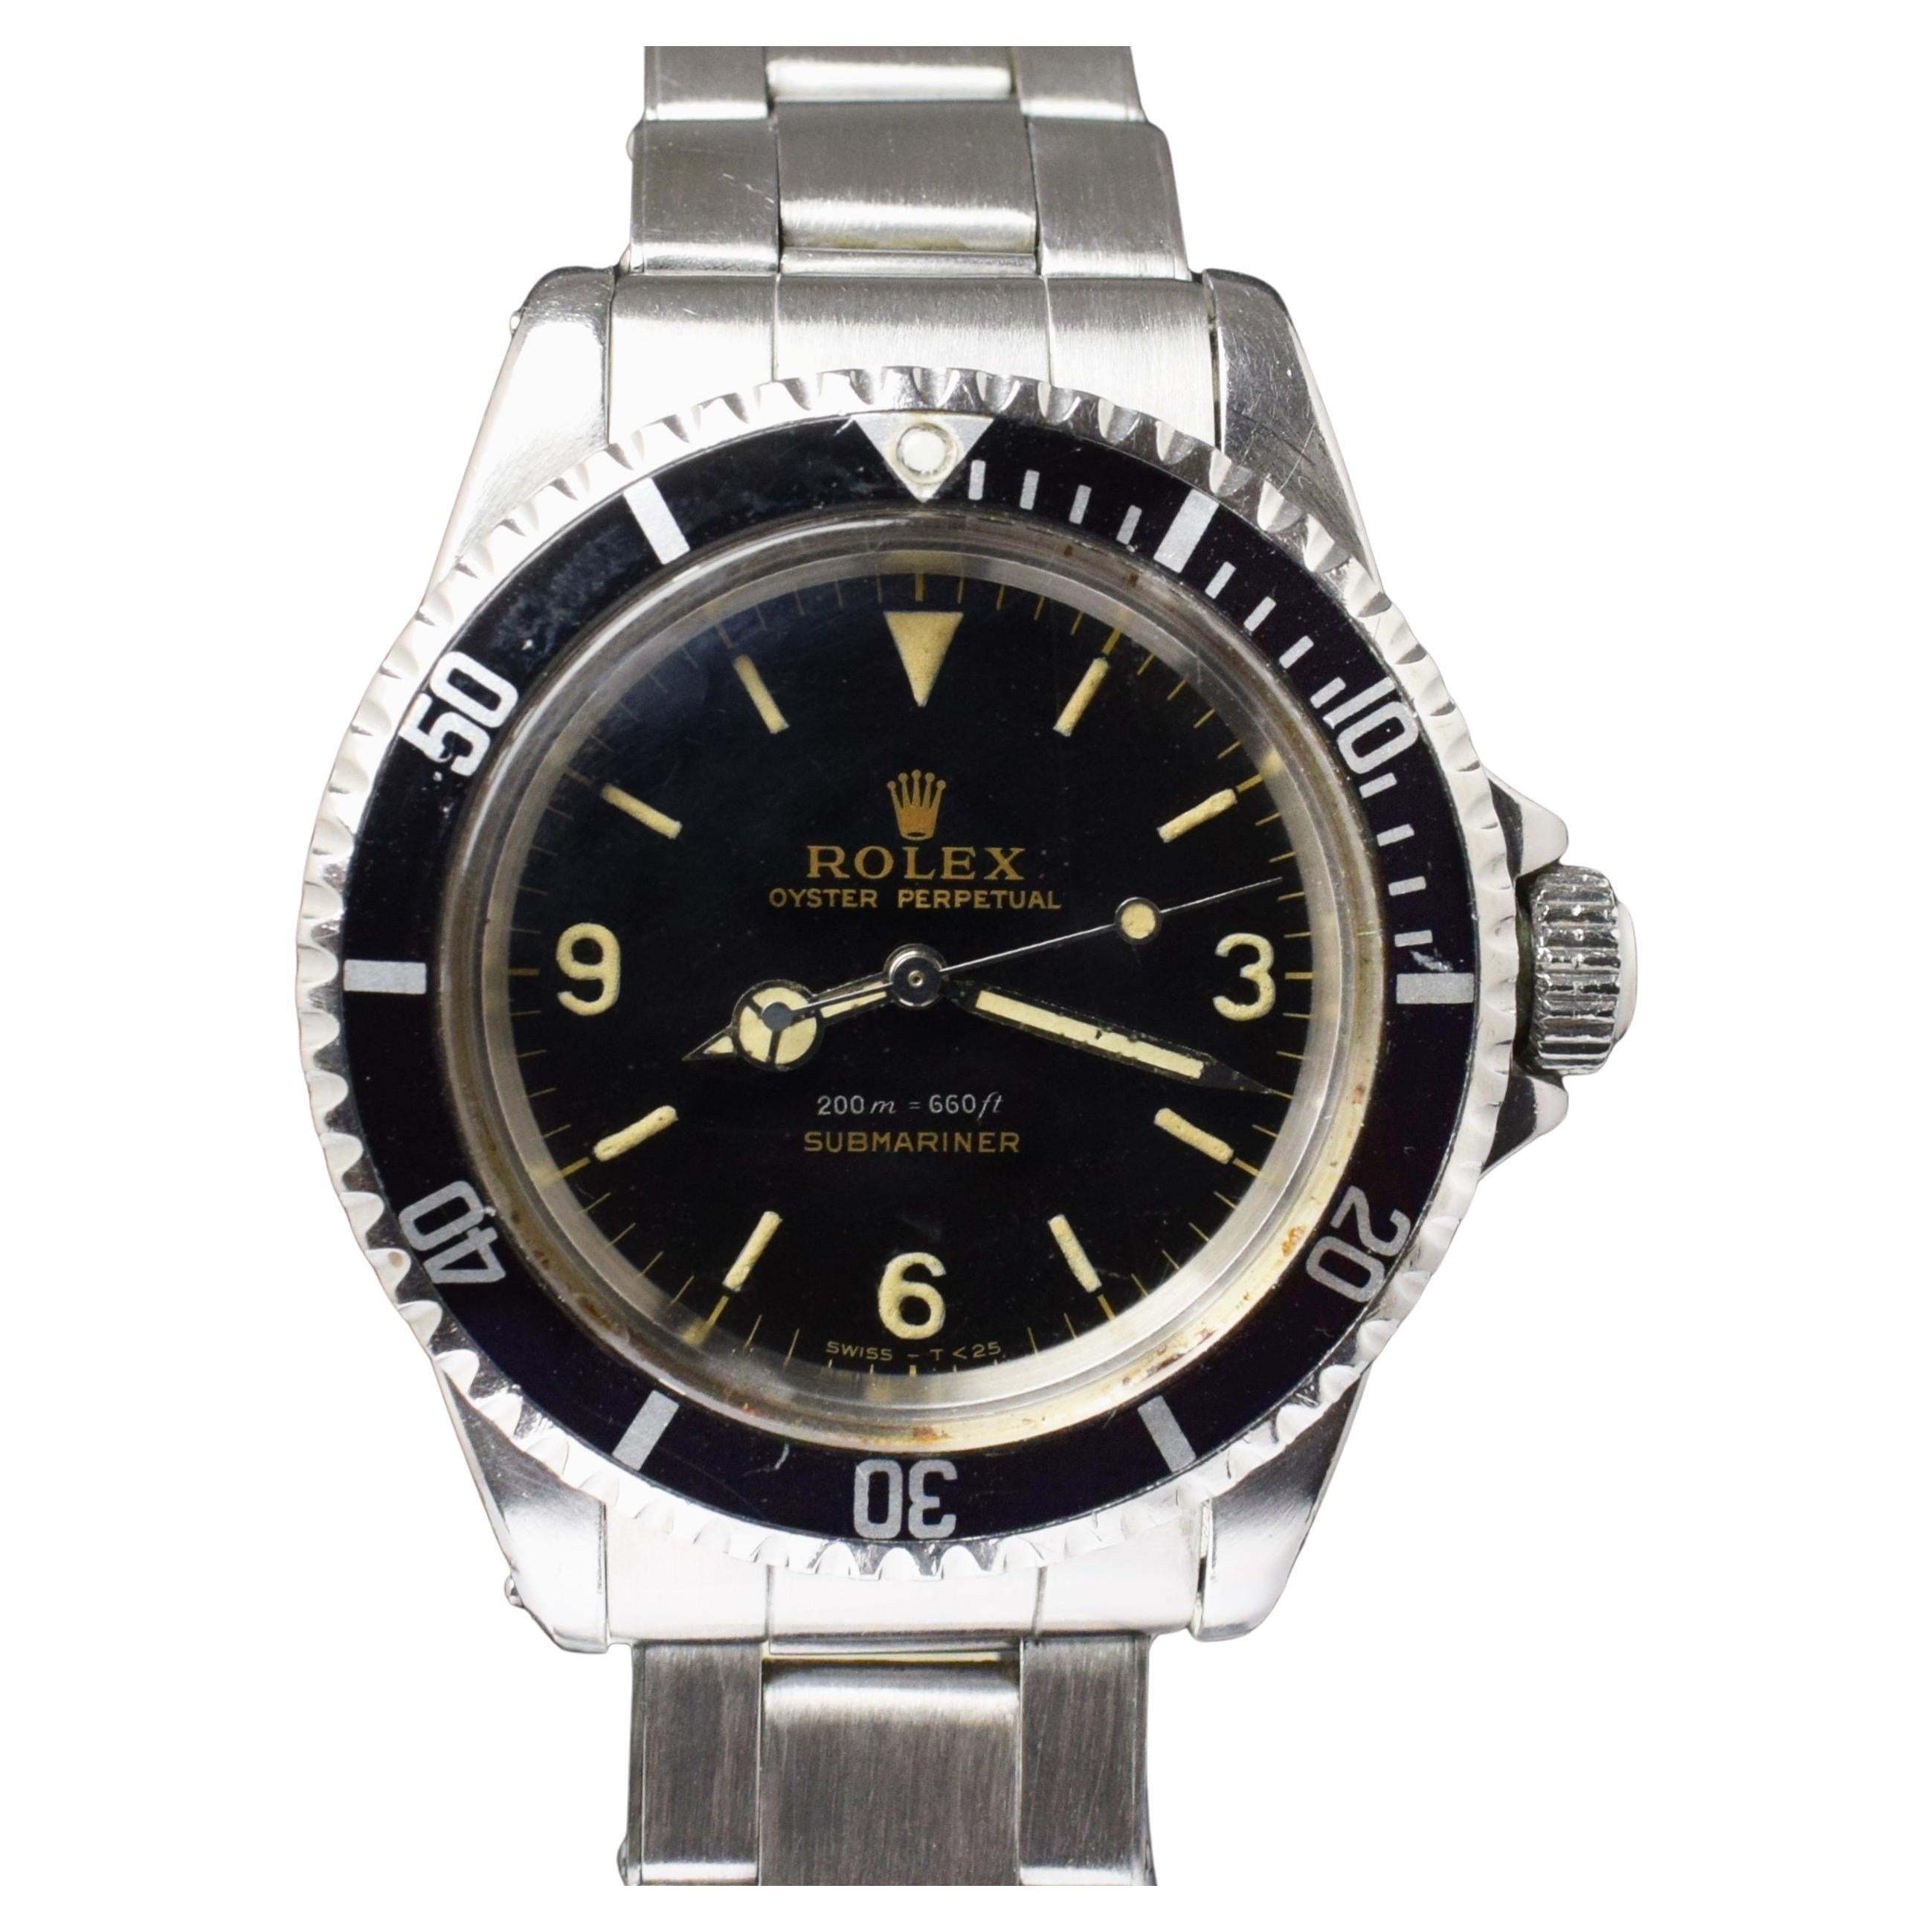 Rolex Submariner Glossy Gilt Explorer Dial 5513 Steel Automatic Watch, 1964 For Sale